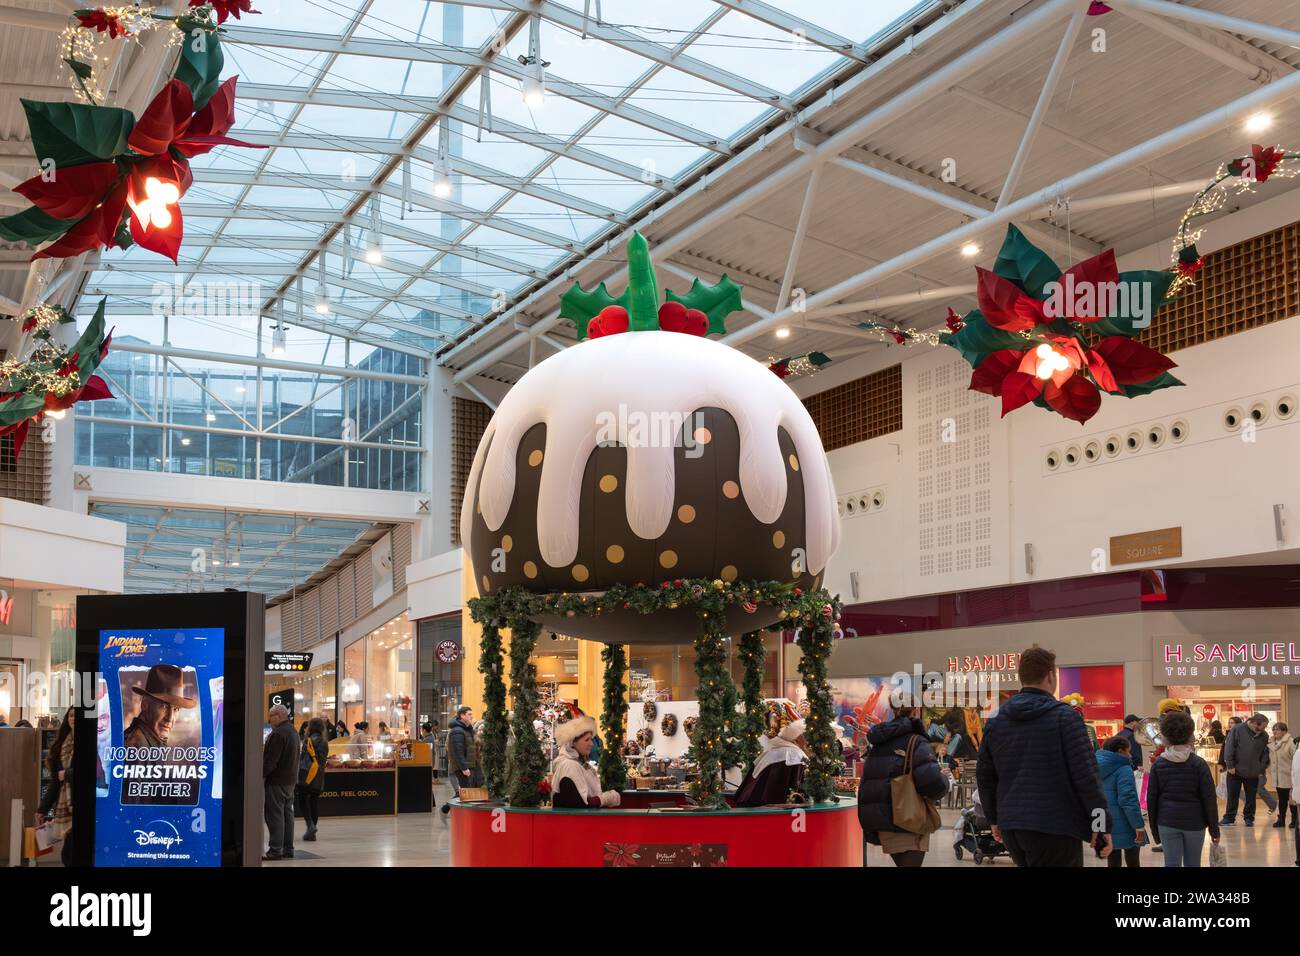 Shoppers buying for Christmas in December in Porchester Square, Festival Place, with a huge Christmas pudding decoration. Basingstoke, UK Stock Photo